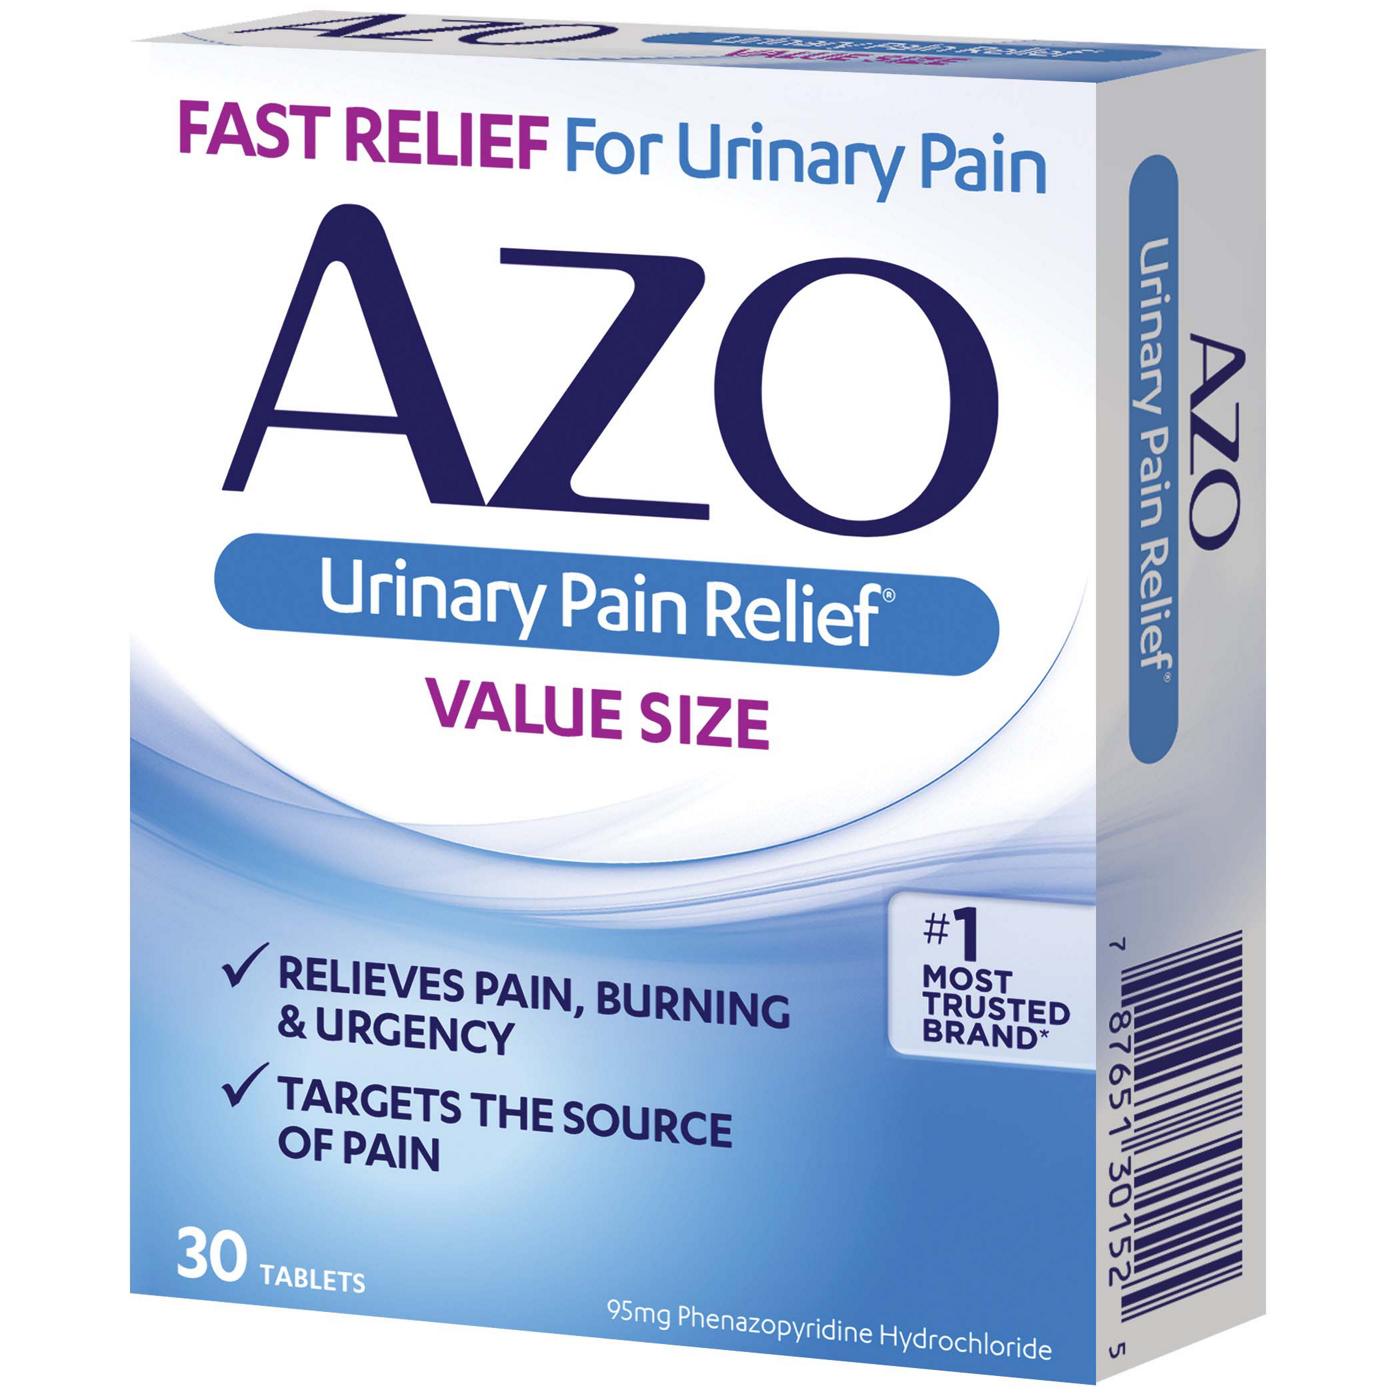 Azo Urinary Pain Relief; image 4 of 4